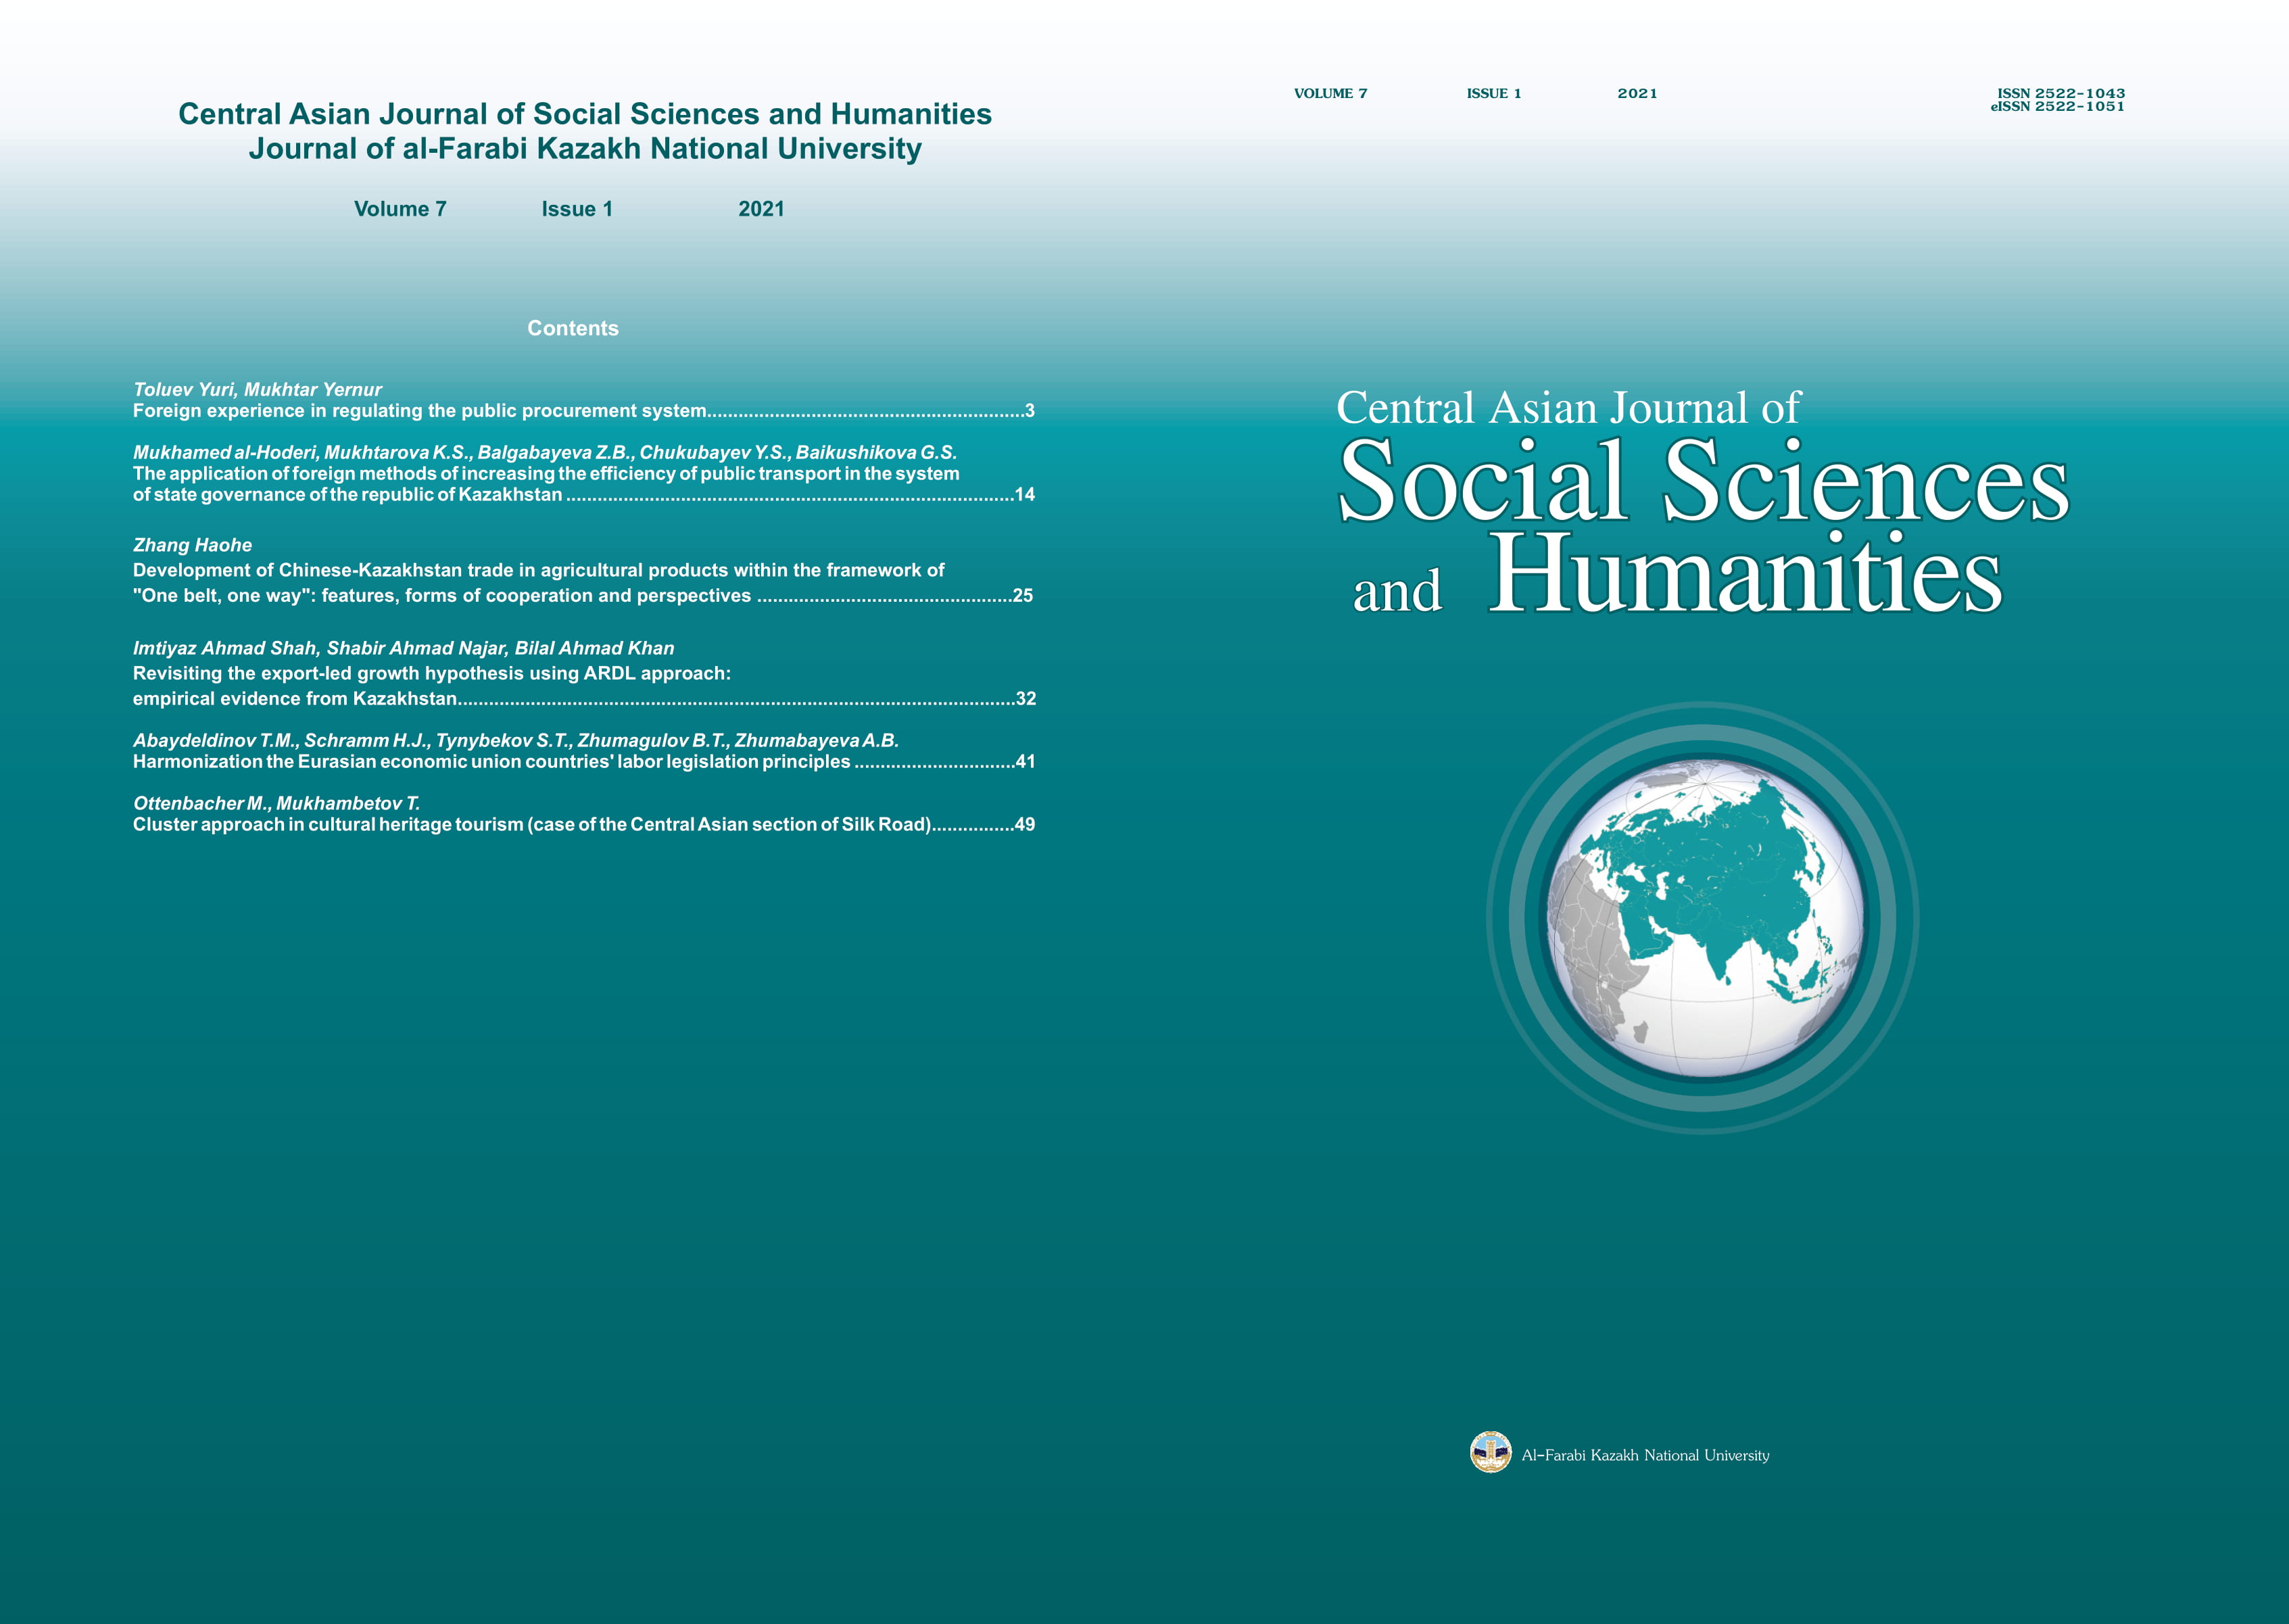 					View Vol. 7 No. 1 (2021): Central Asian Journal of Social Sciences  and Humanities
				